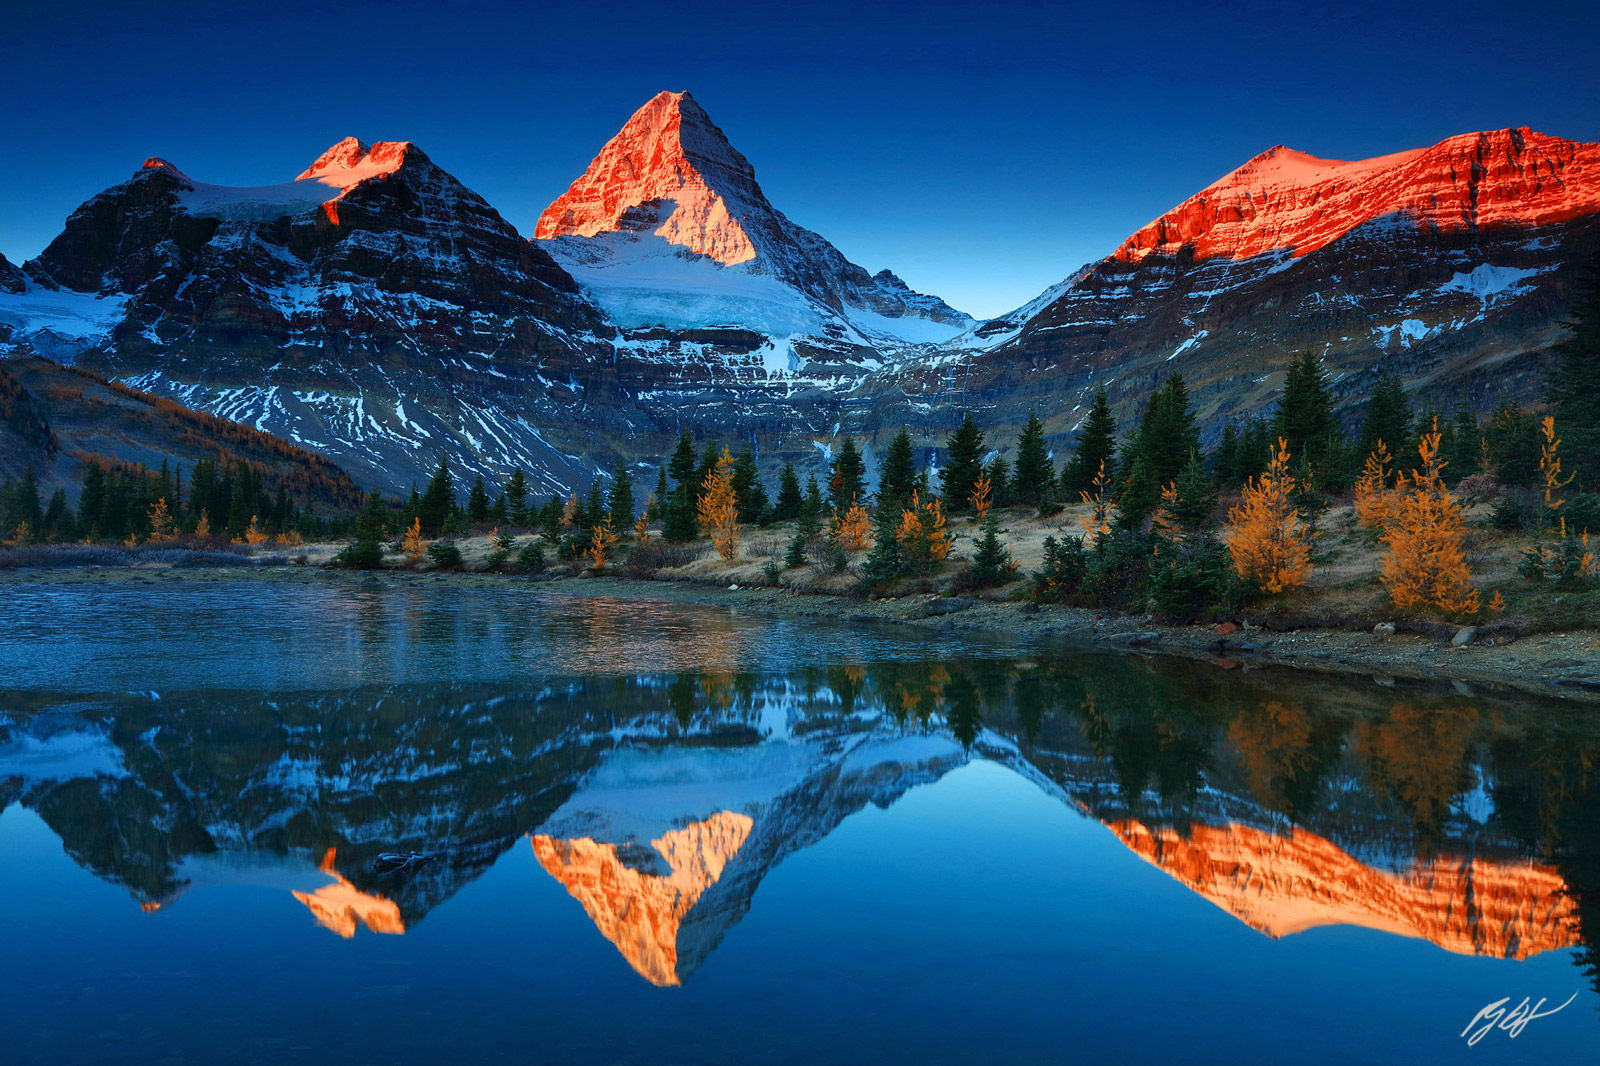 Sunrise Mt Assiniboine Reflected in a Tarn from Mt Assiniboine Provincial Park in British Columbia Canada